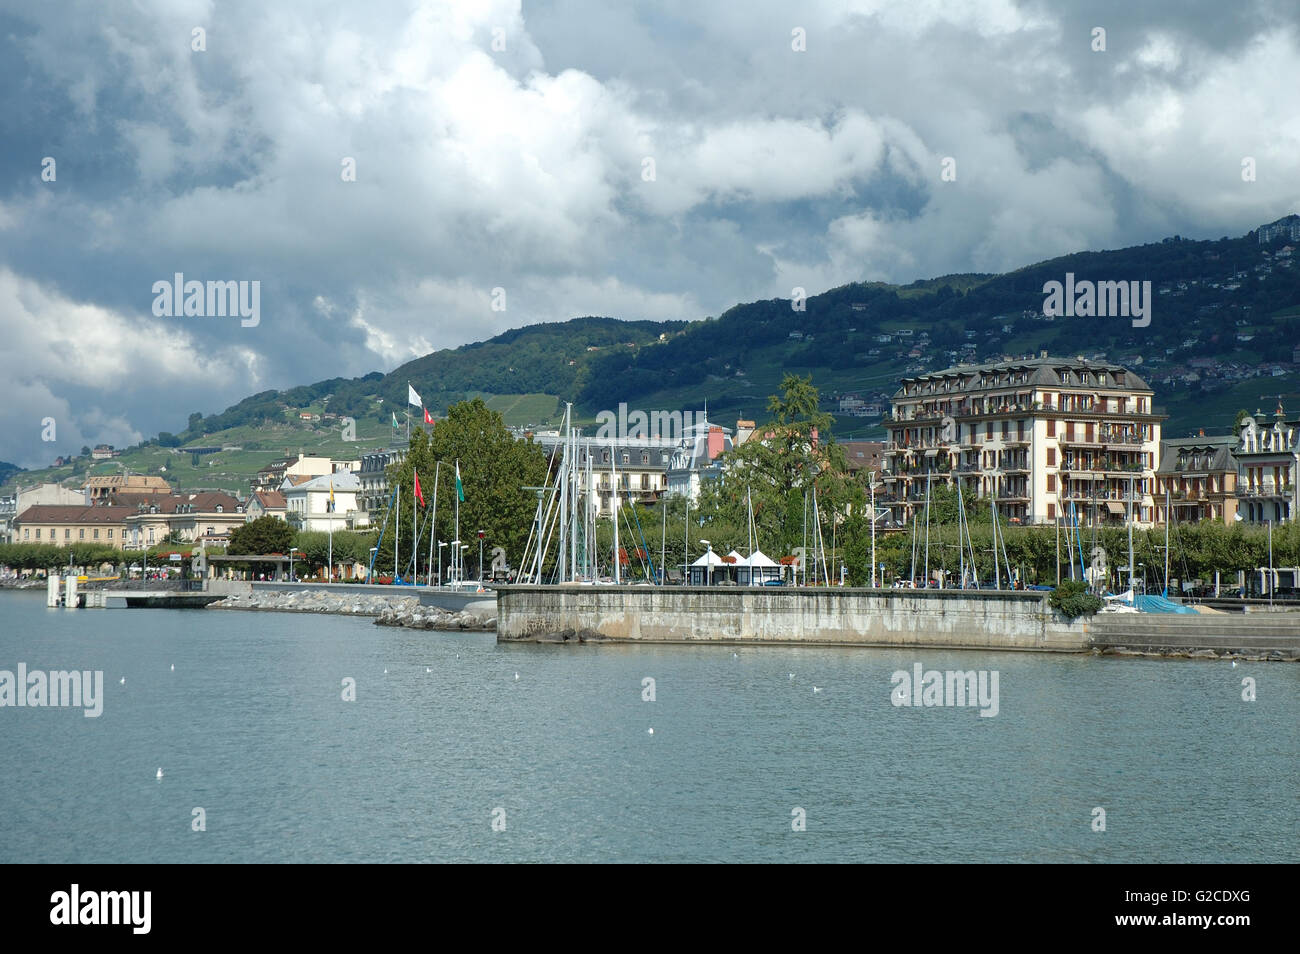 Vevey, Switzerland - August 16, 2014: Buildings in Vevey at Geneve lake in Switzerland. Unidentified people visible. Stock Photo